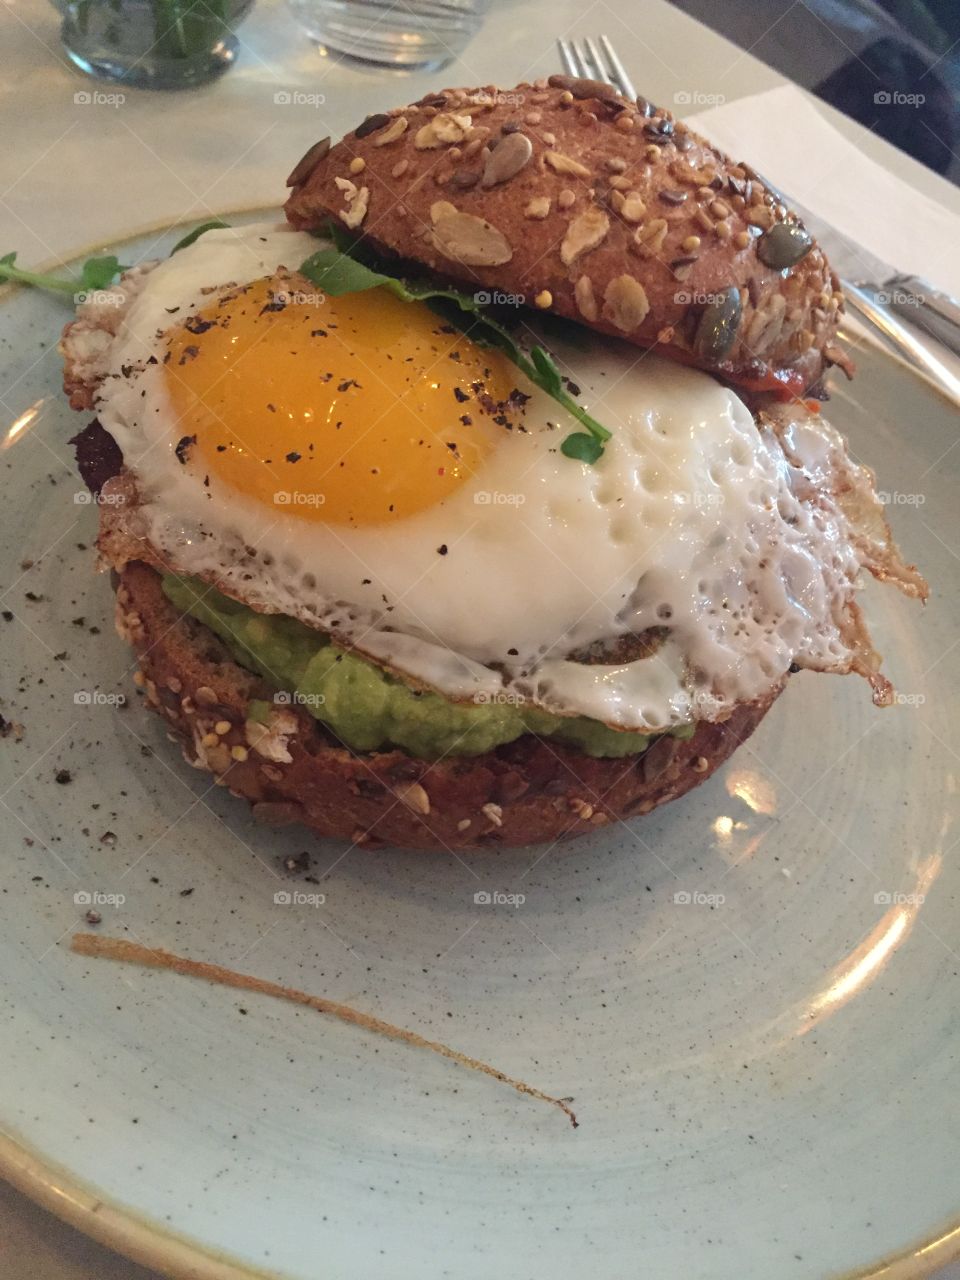 An egg on a whole wheat bun with avocado, sausage, and chives 